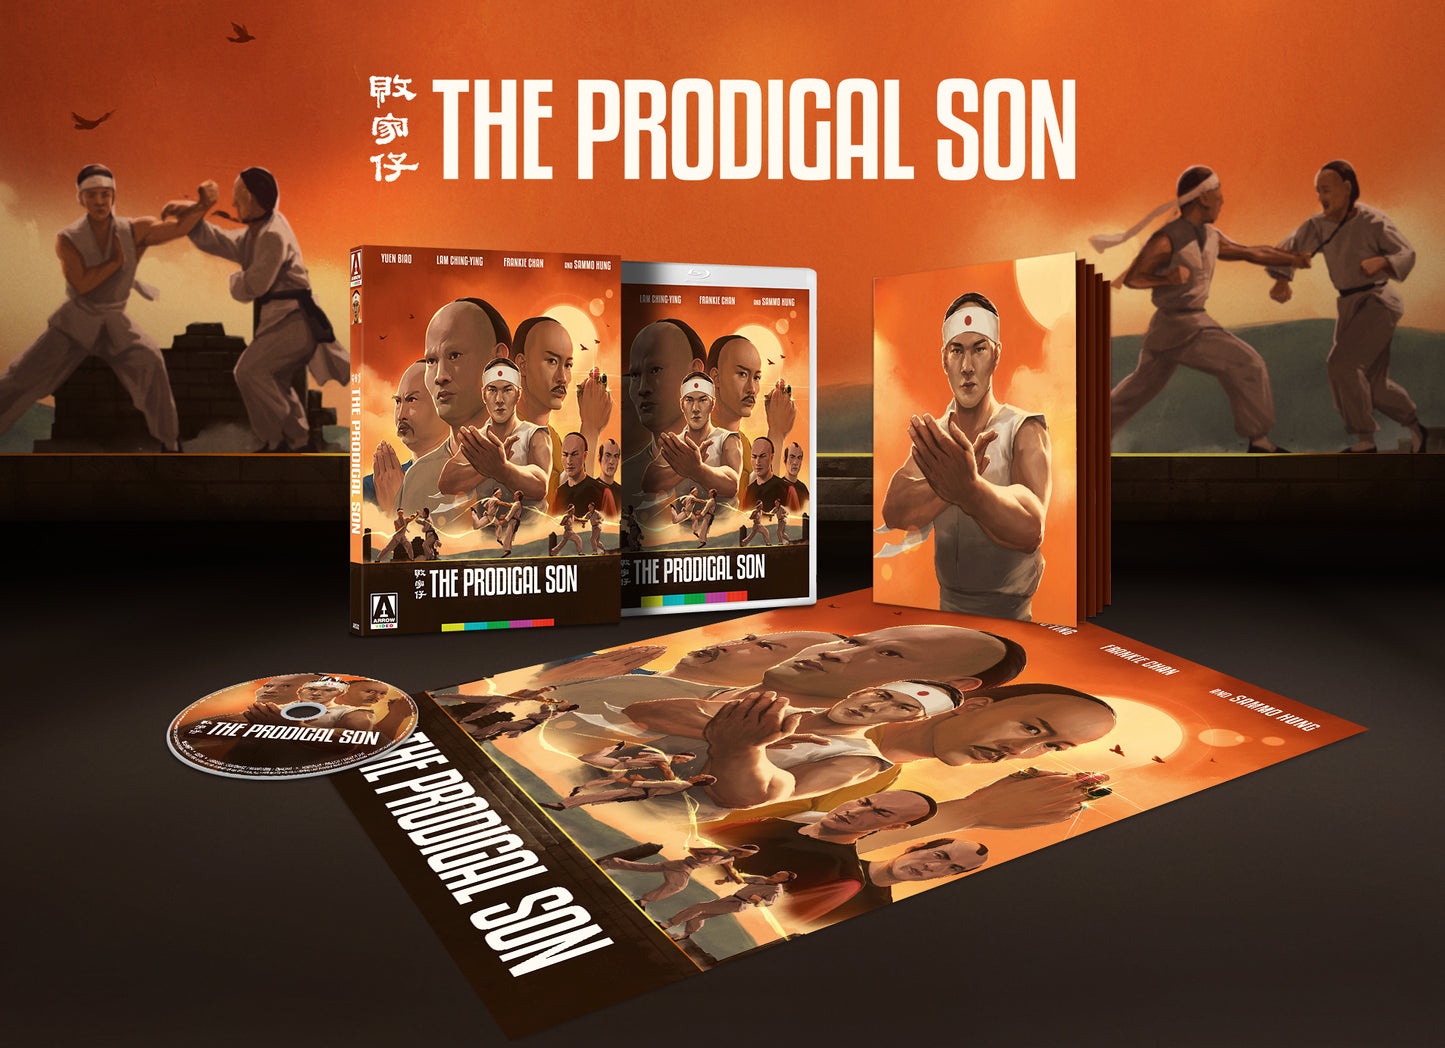 The Prodigal Son Limited Edition Blu-ray with Slipcover (Arrow U.S.)